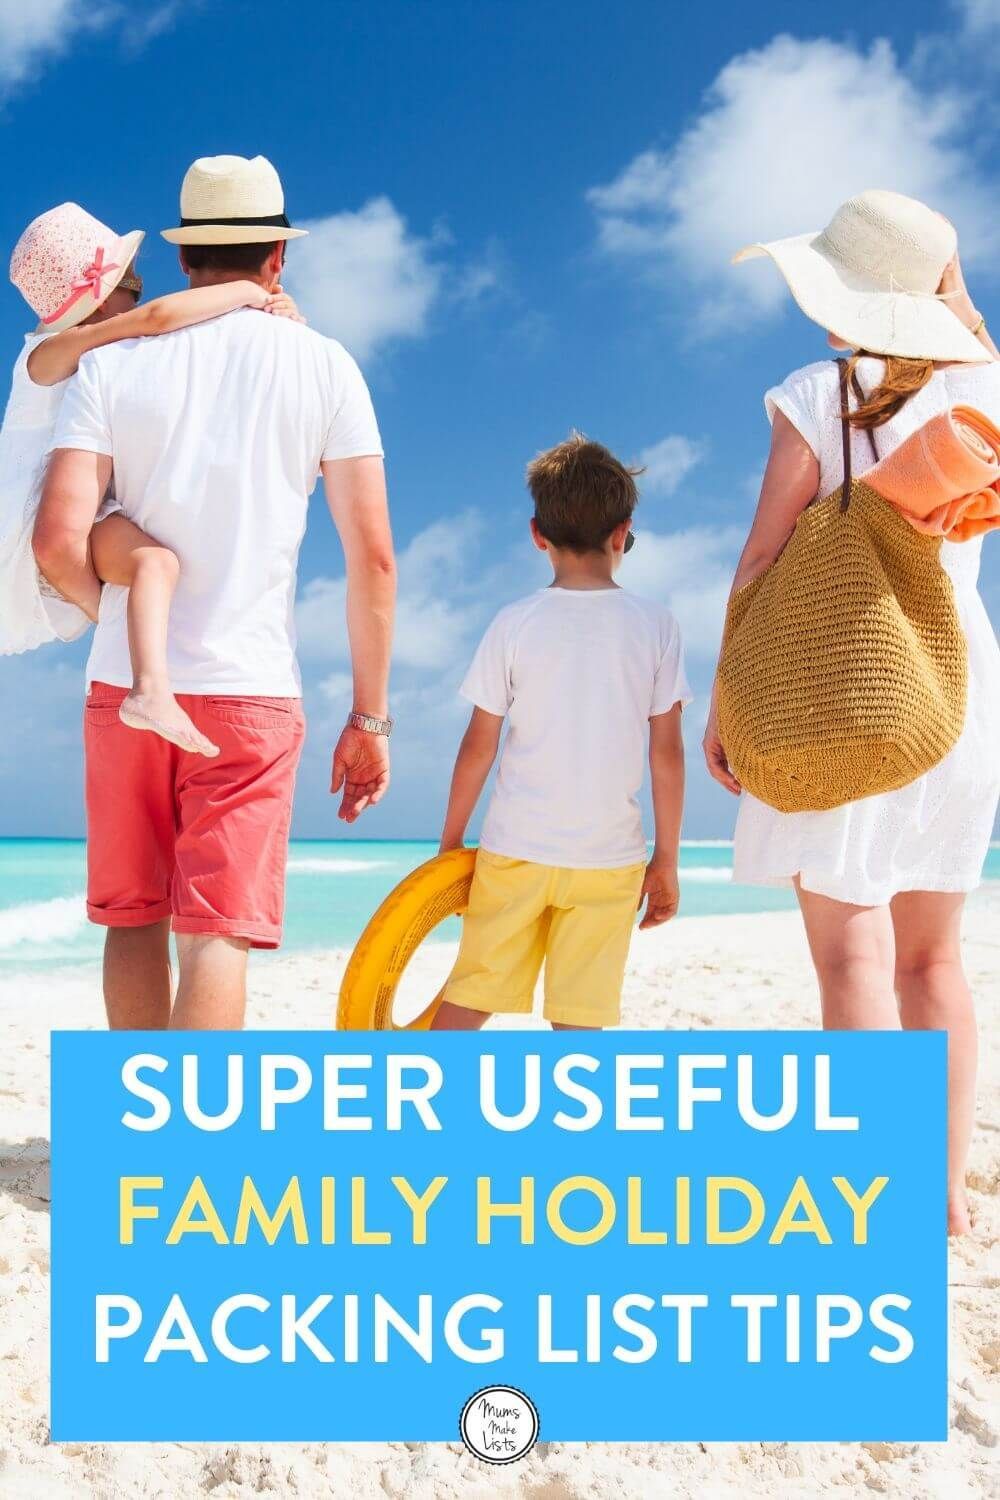 Clever family holiday packing list tips -   10 holiday Packing organisation ideas